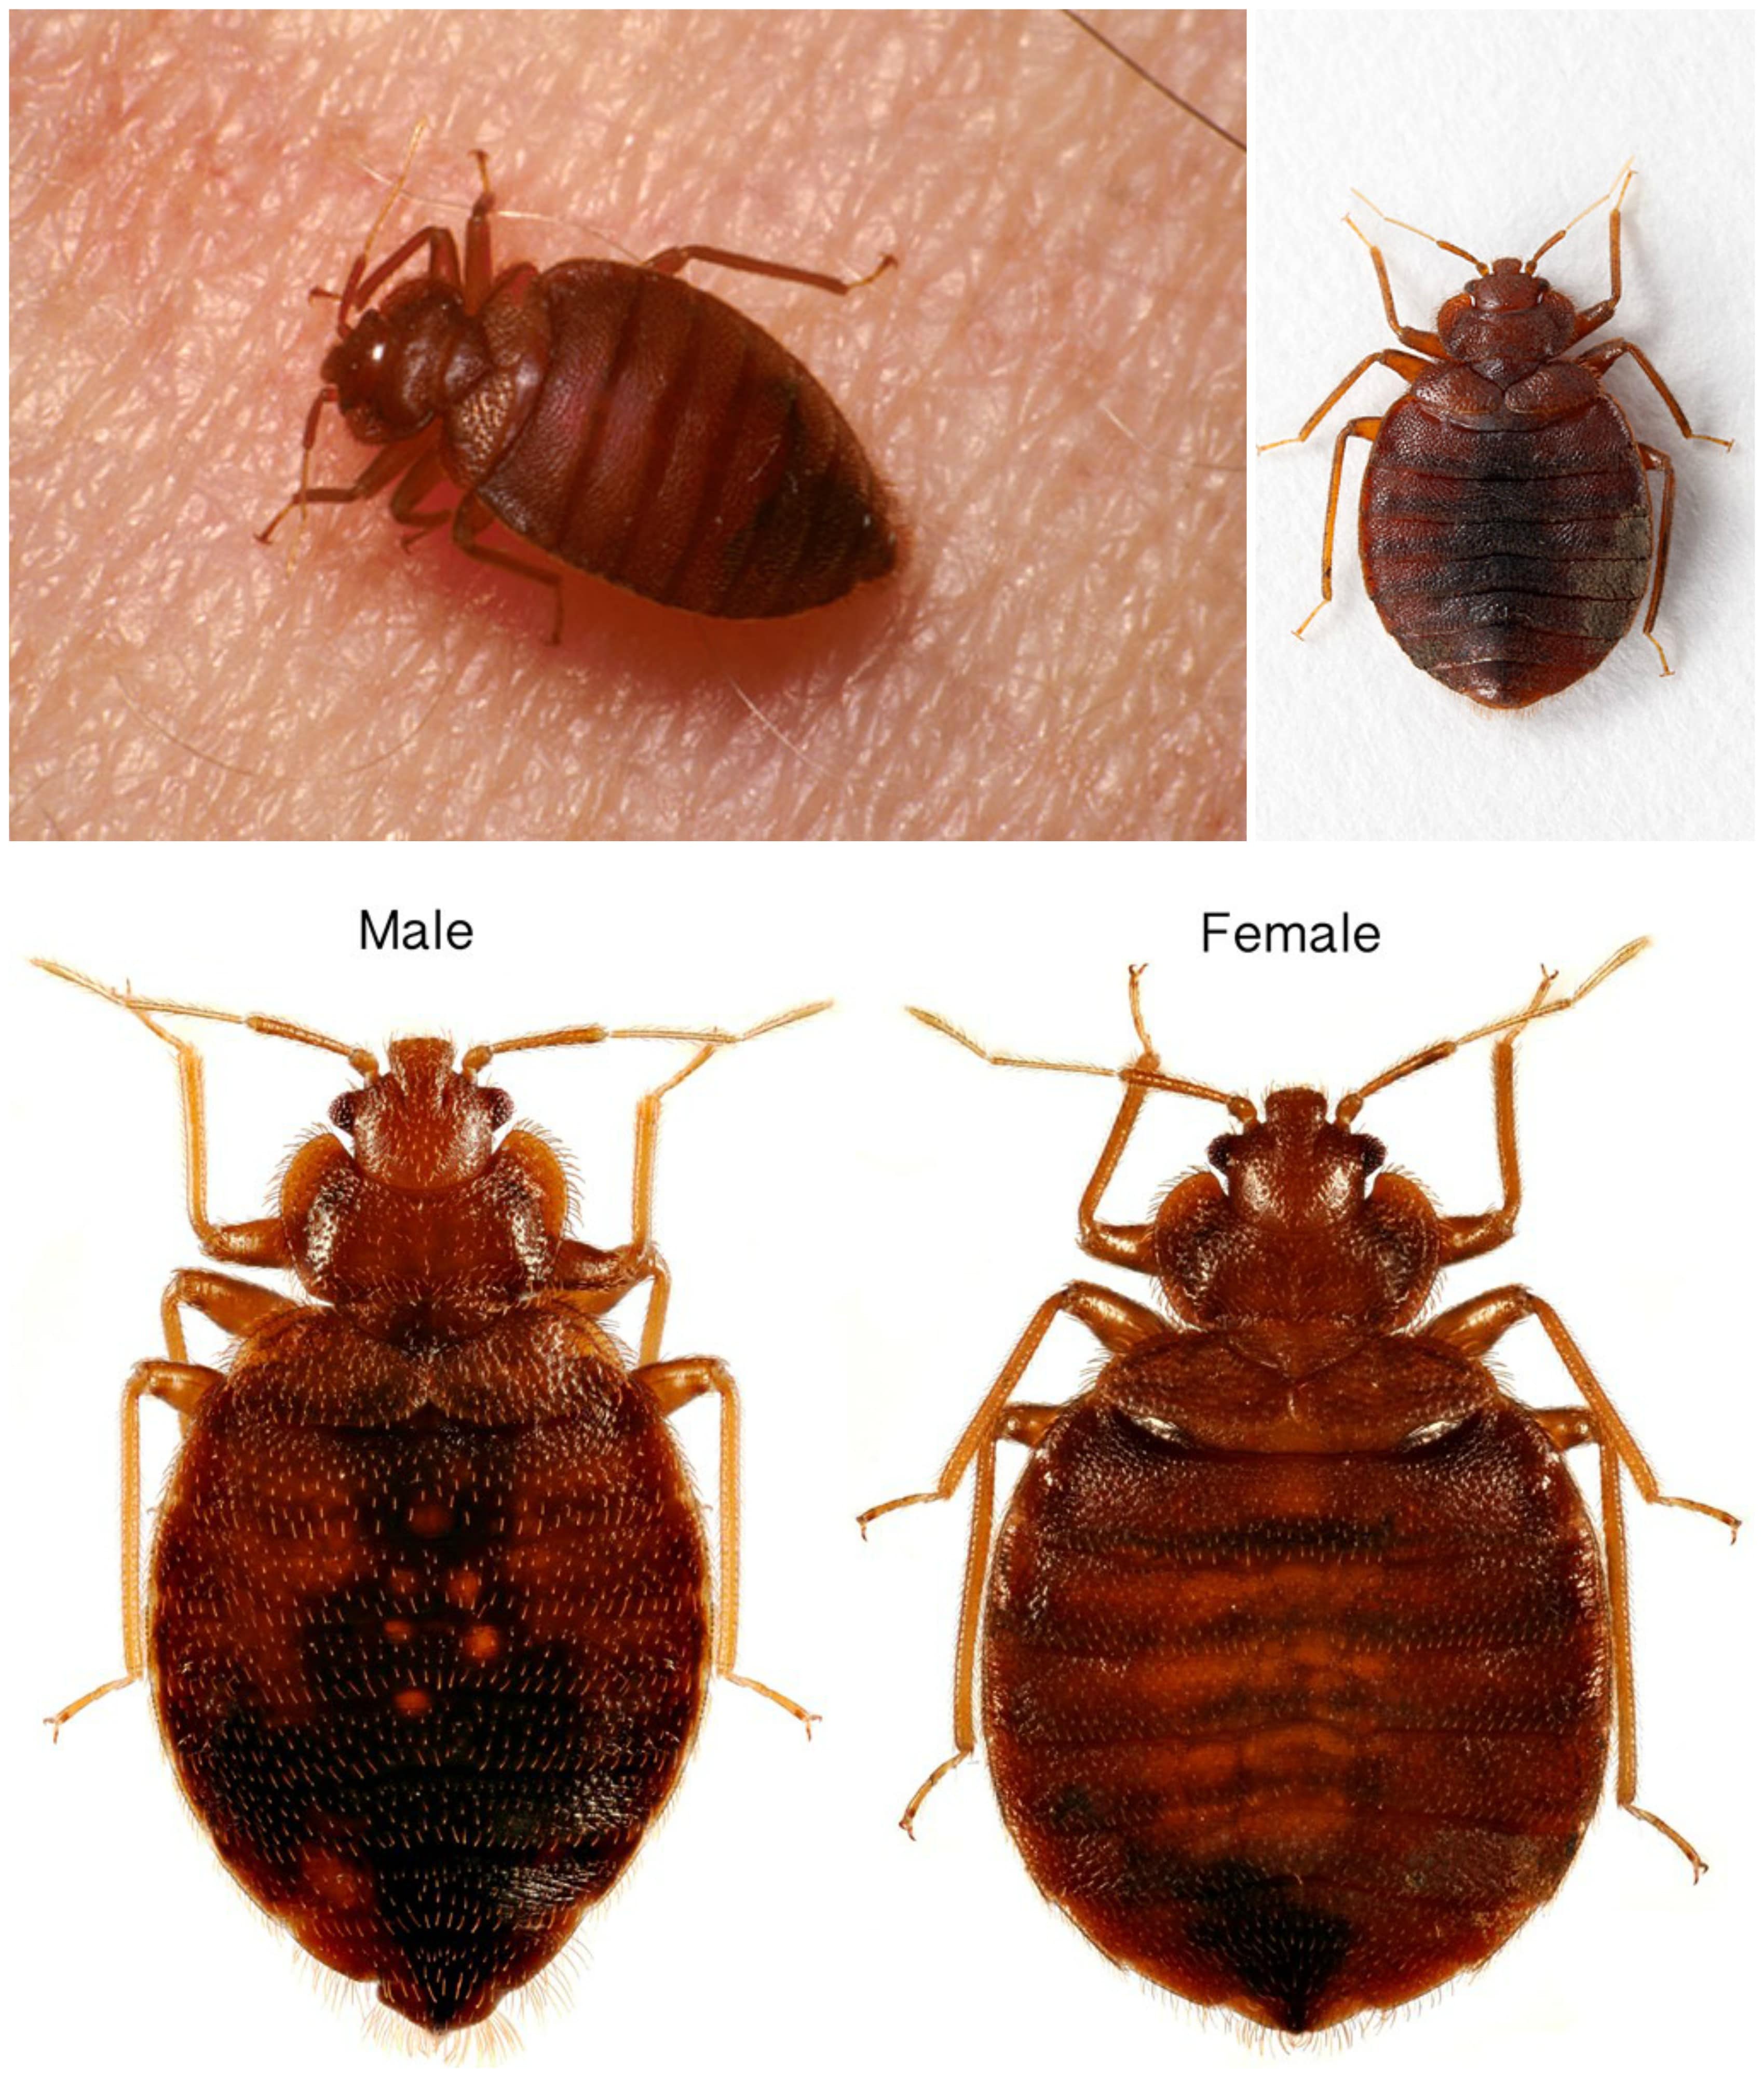 Luxury 60 Of Male And Female Bed Bugs Millieceaselessunicef